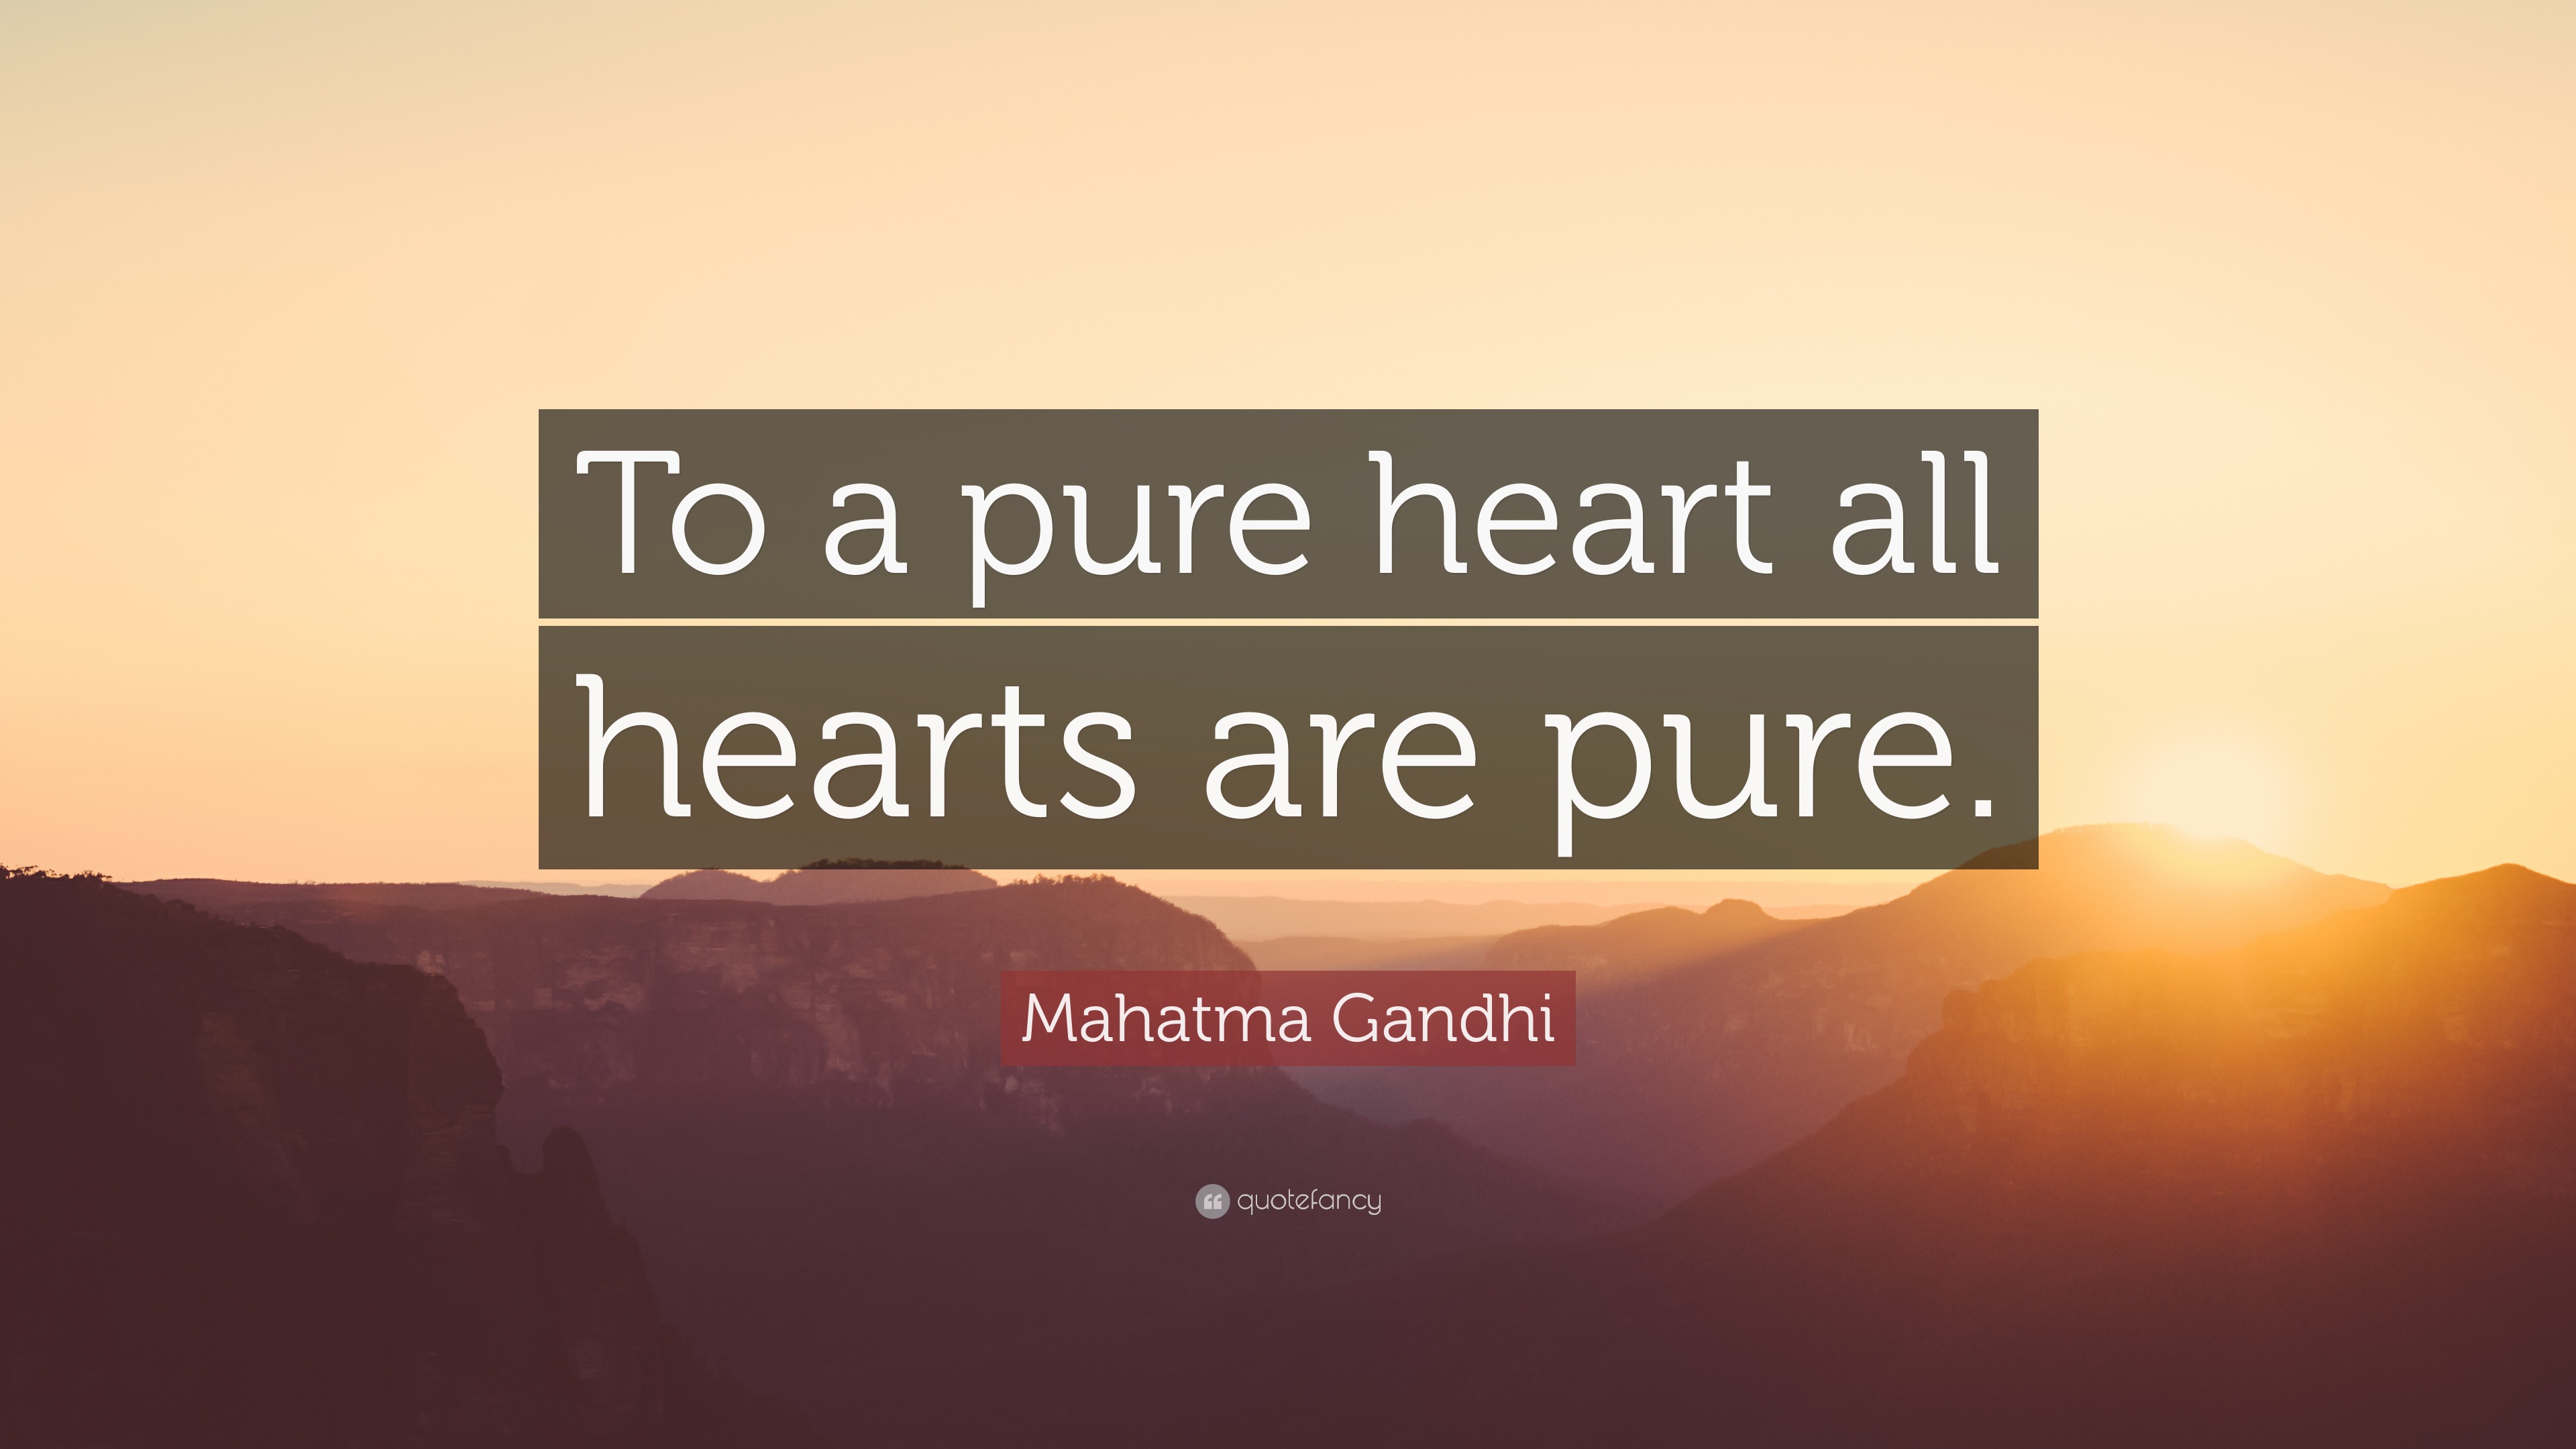 Mahatma Gandhi Quote: "To a pure heart all hearts are pure." (7 wallpapers) - Quotefancy